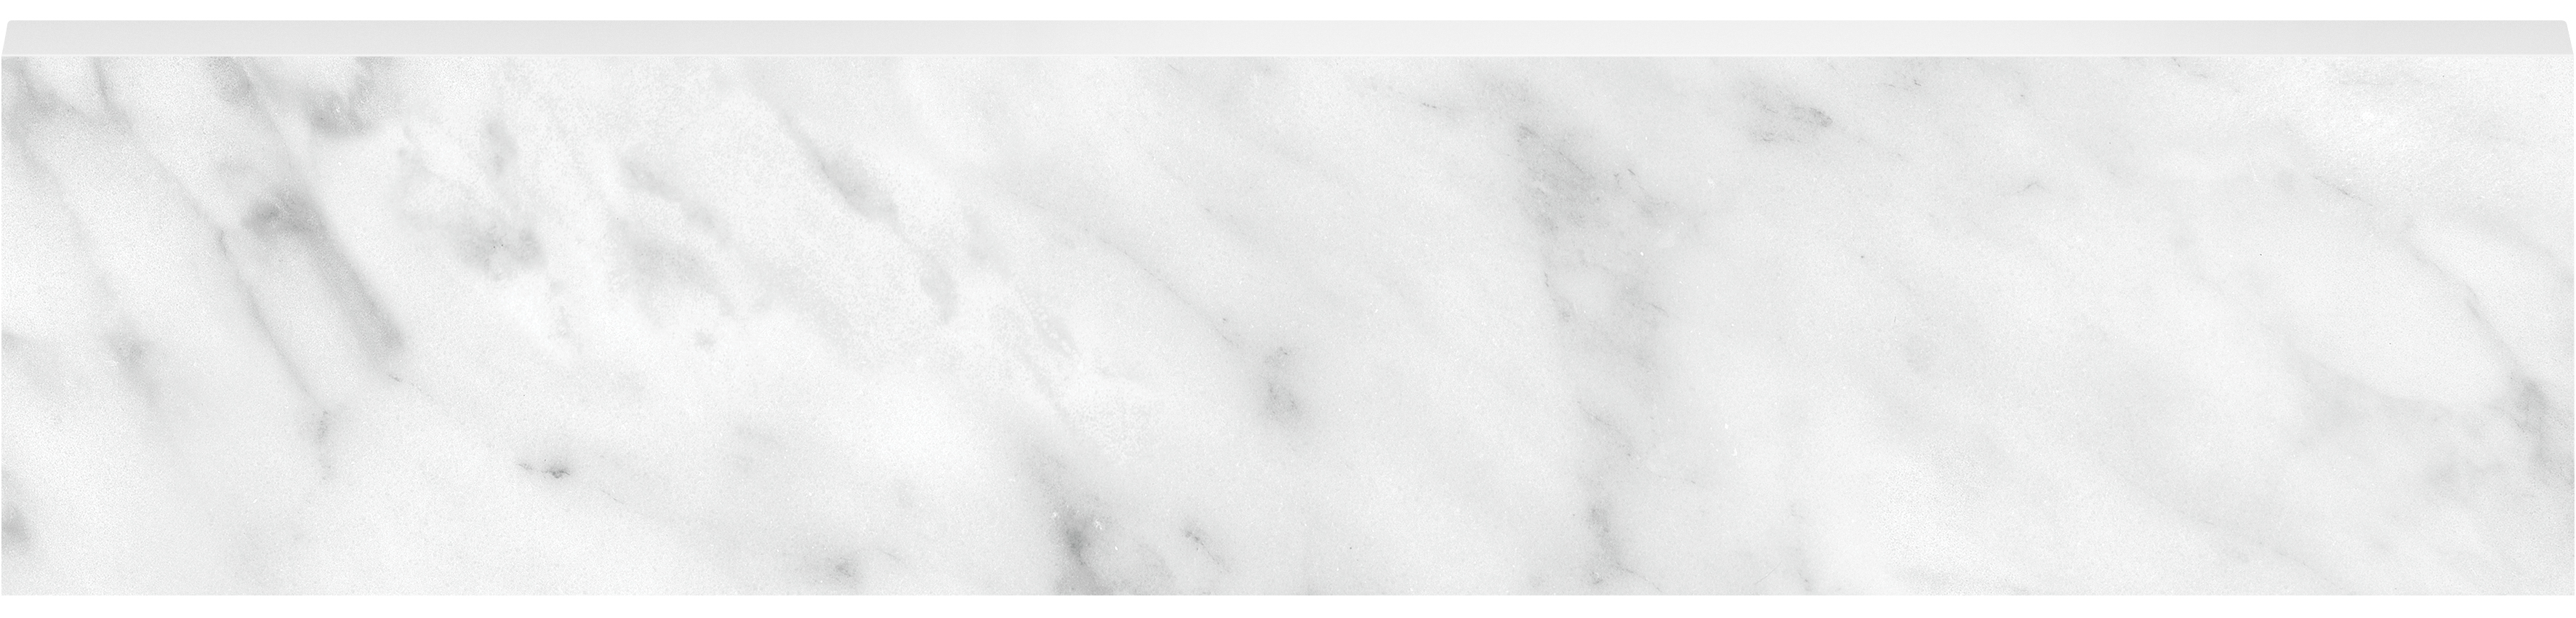 carrara gioia pattern glazed porcelain bullnose molding from la marca anatolia collection distributed by surface group international honed finish straight edge edge 3x12 bar shape